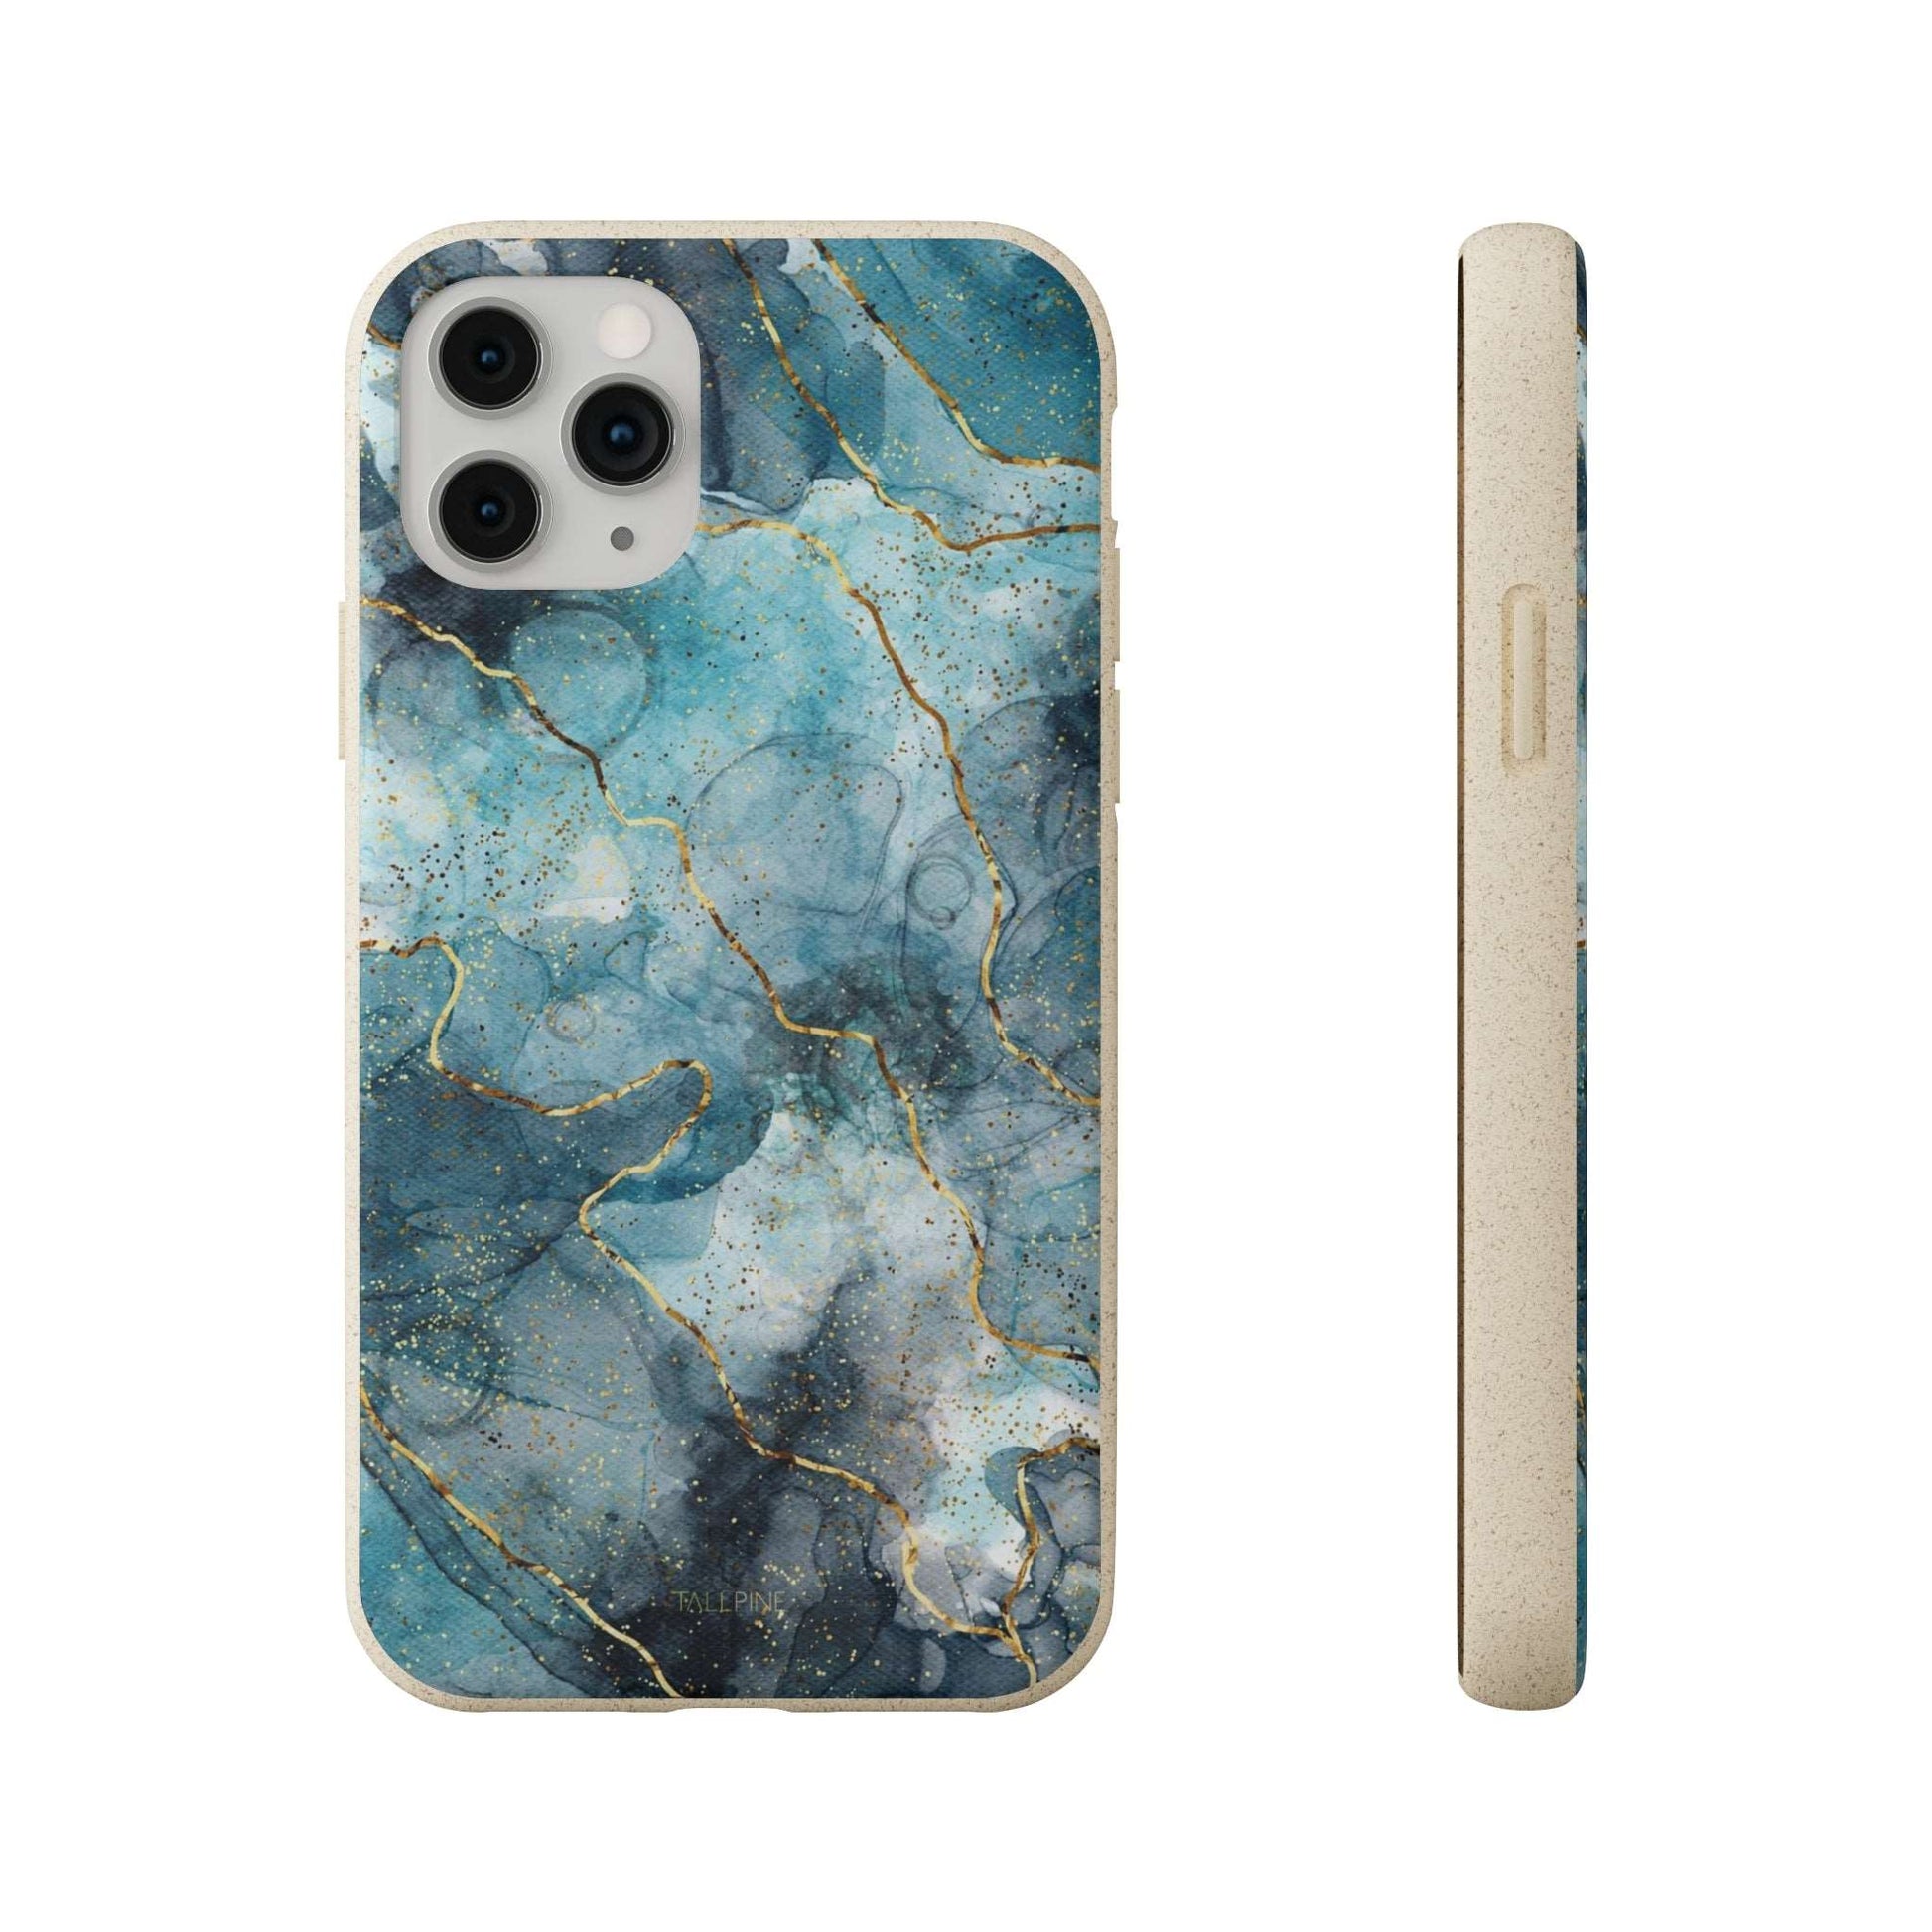 Sapphire Marble - Eco Case iPhone 11 Pro - Tallpine Cases | Sustainable and Eco-Friendly - Abstract Blue Marble